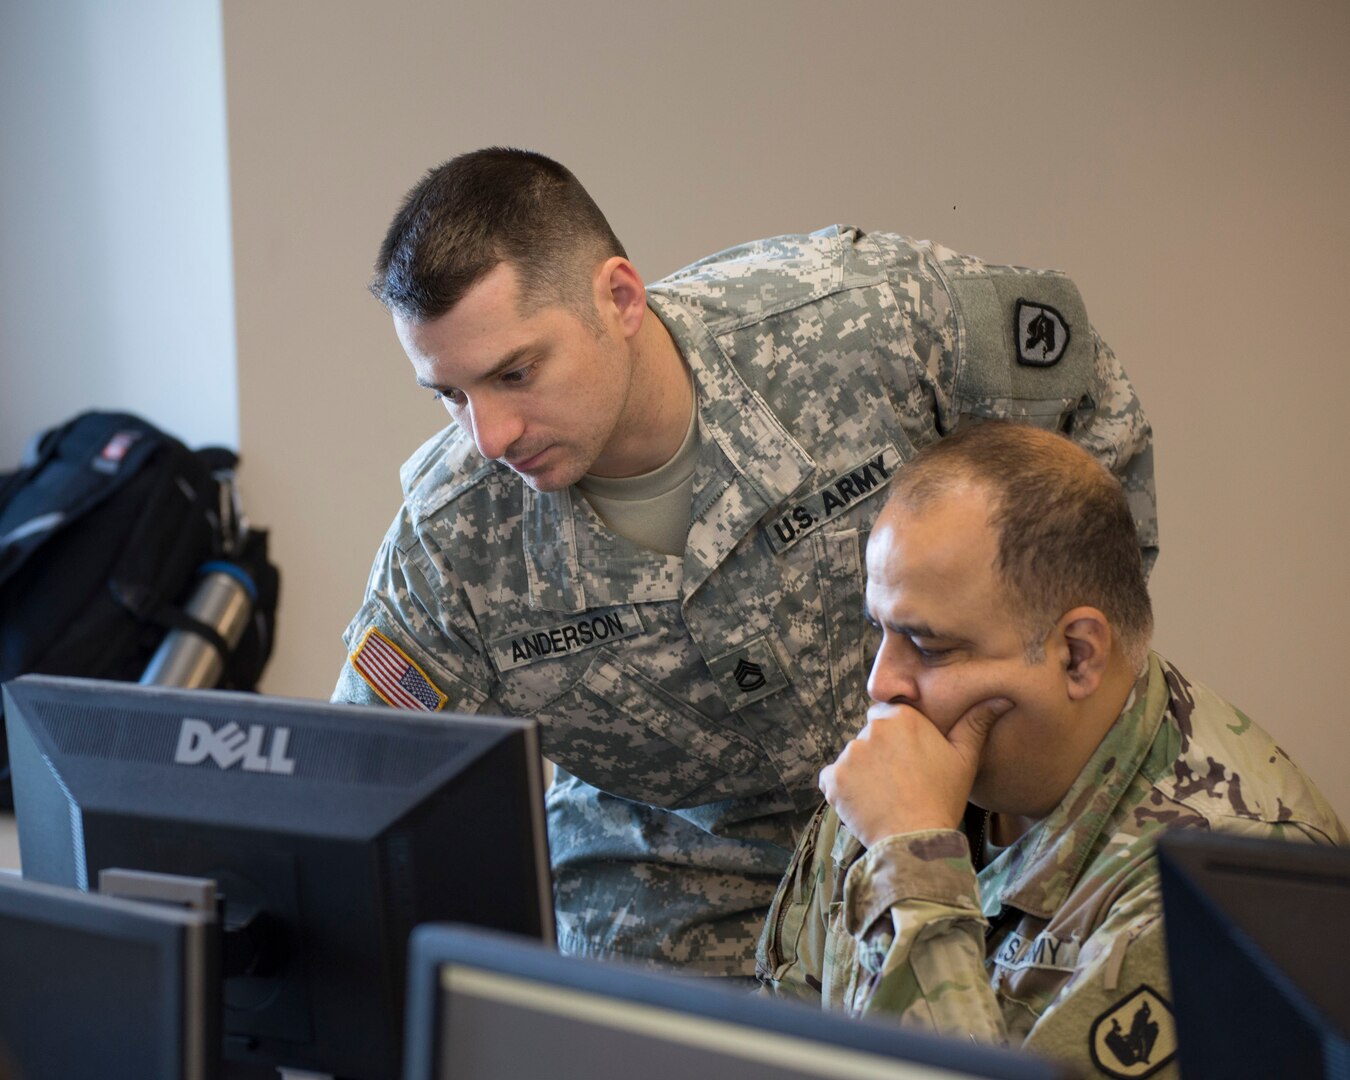 Sgt. 1st Class Samuel Anderson, Joint Force Headquarters, Washington National Guard, advises Cpt. Sameer Puri, 56th Theater Information Operations Group, during the International Collegiate Cyber Defense Invitational, July 6, 2018, at Highline Community College in Des Moines, Washington. Washington National Guard Soldiers attended the International Collegiate Cyber Defense Invitational to help educate information technology students on their responses to cyber-attacks.